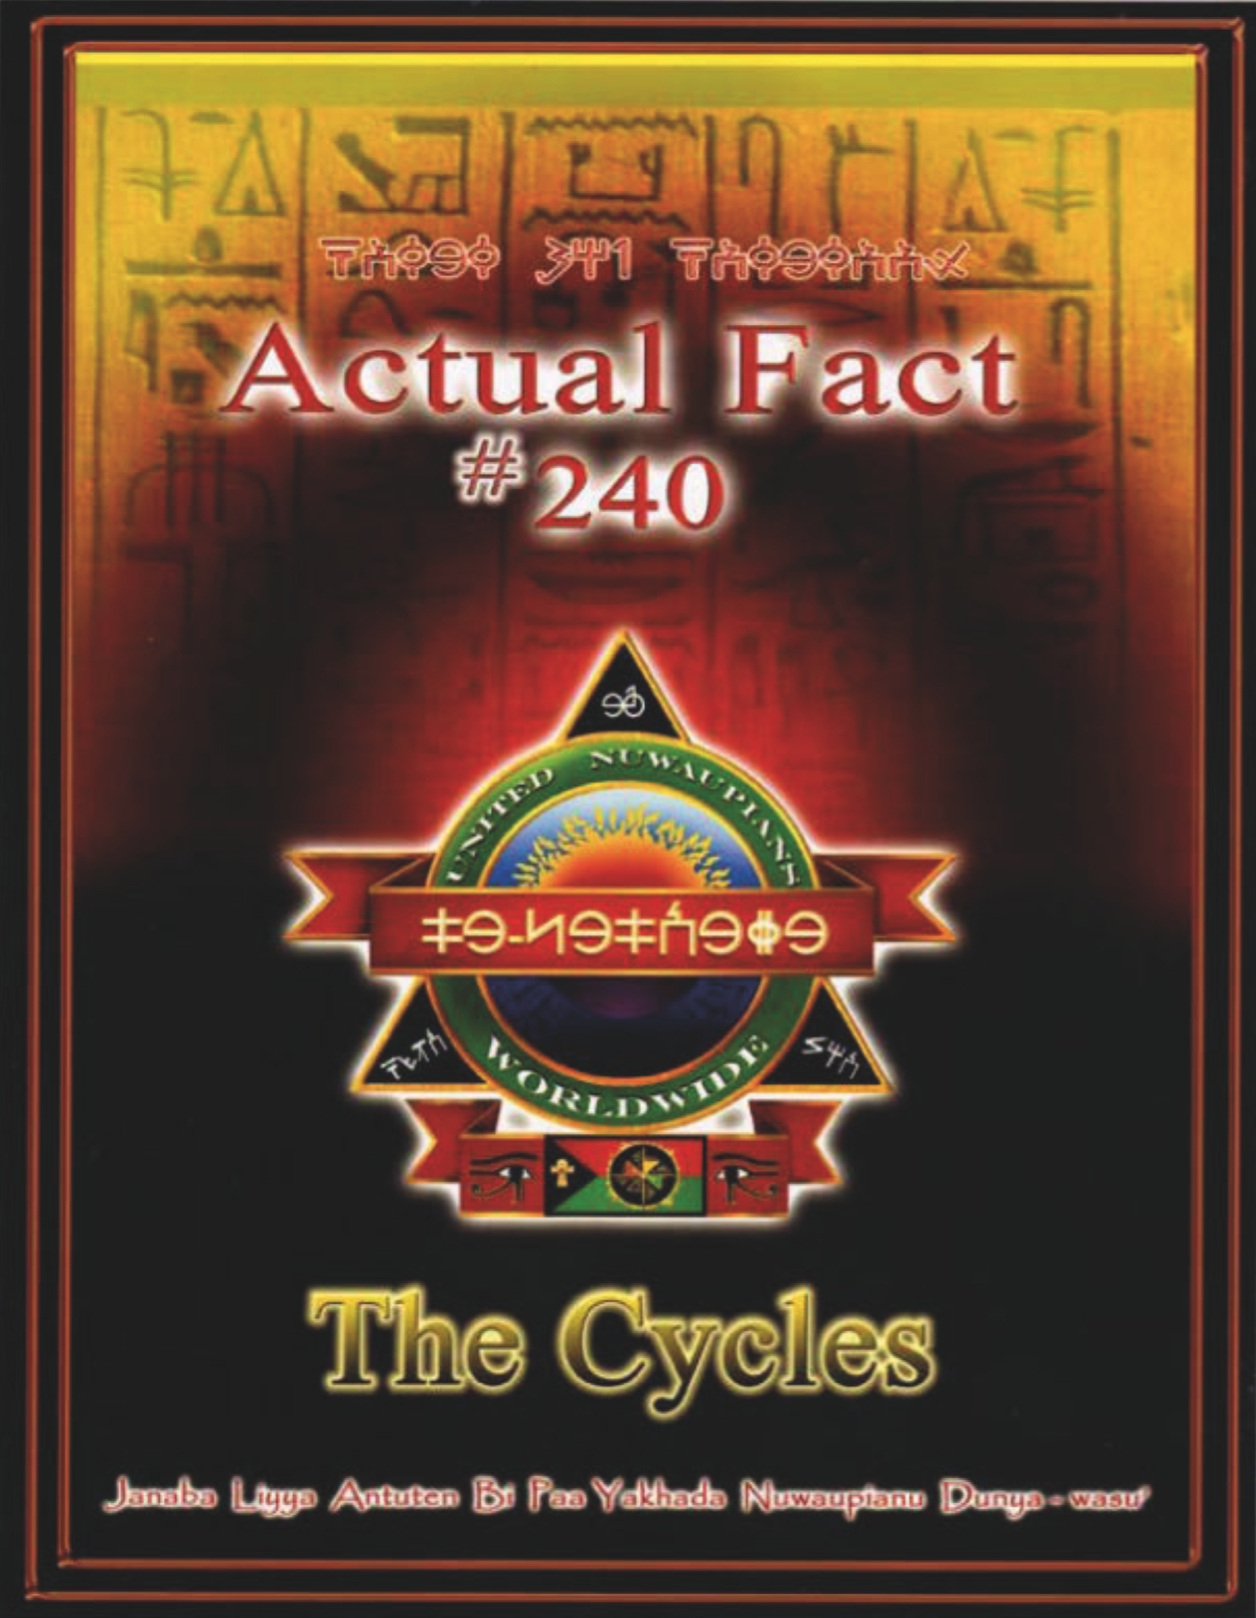 Actual Fact #240 The Cycles